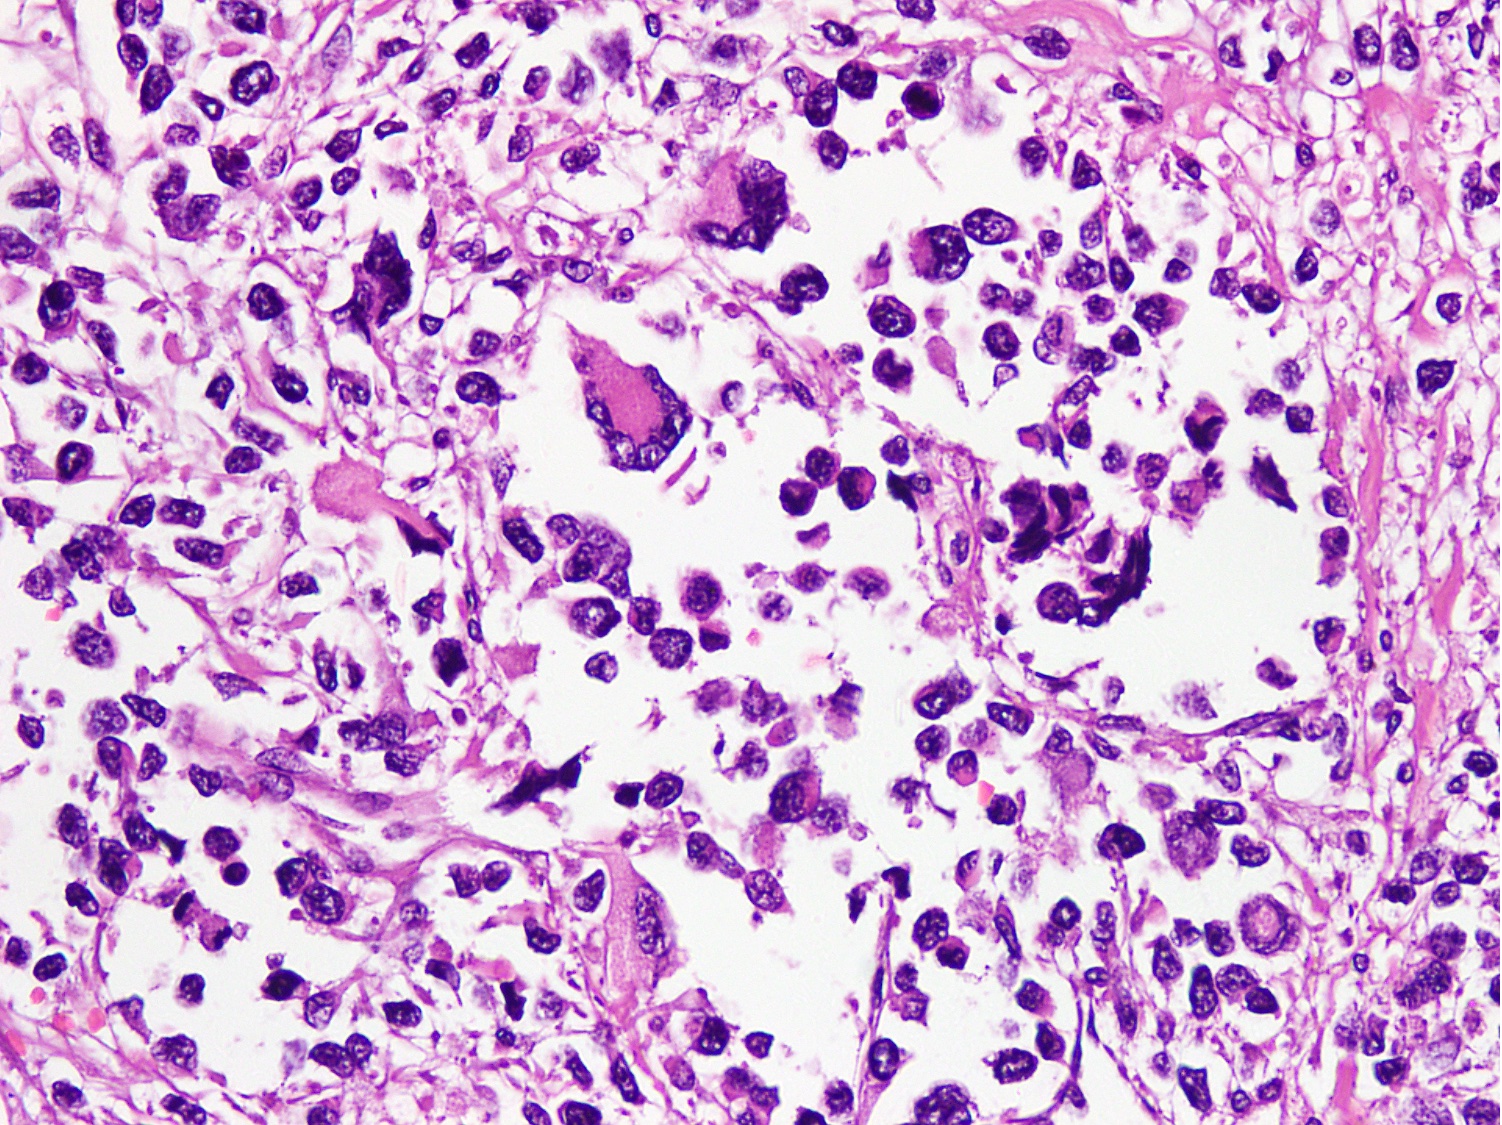 Wreath-like multinucleated giant cells